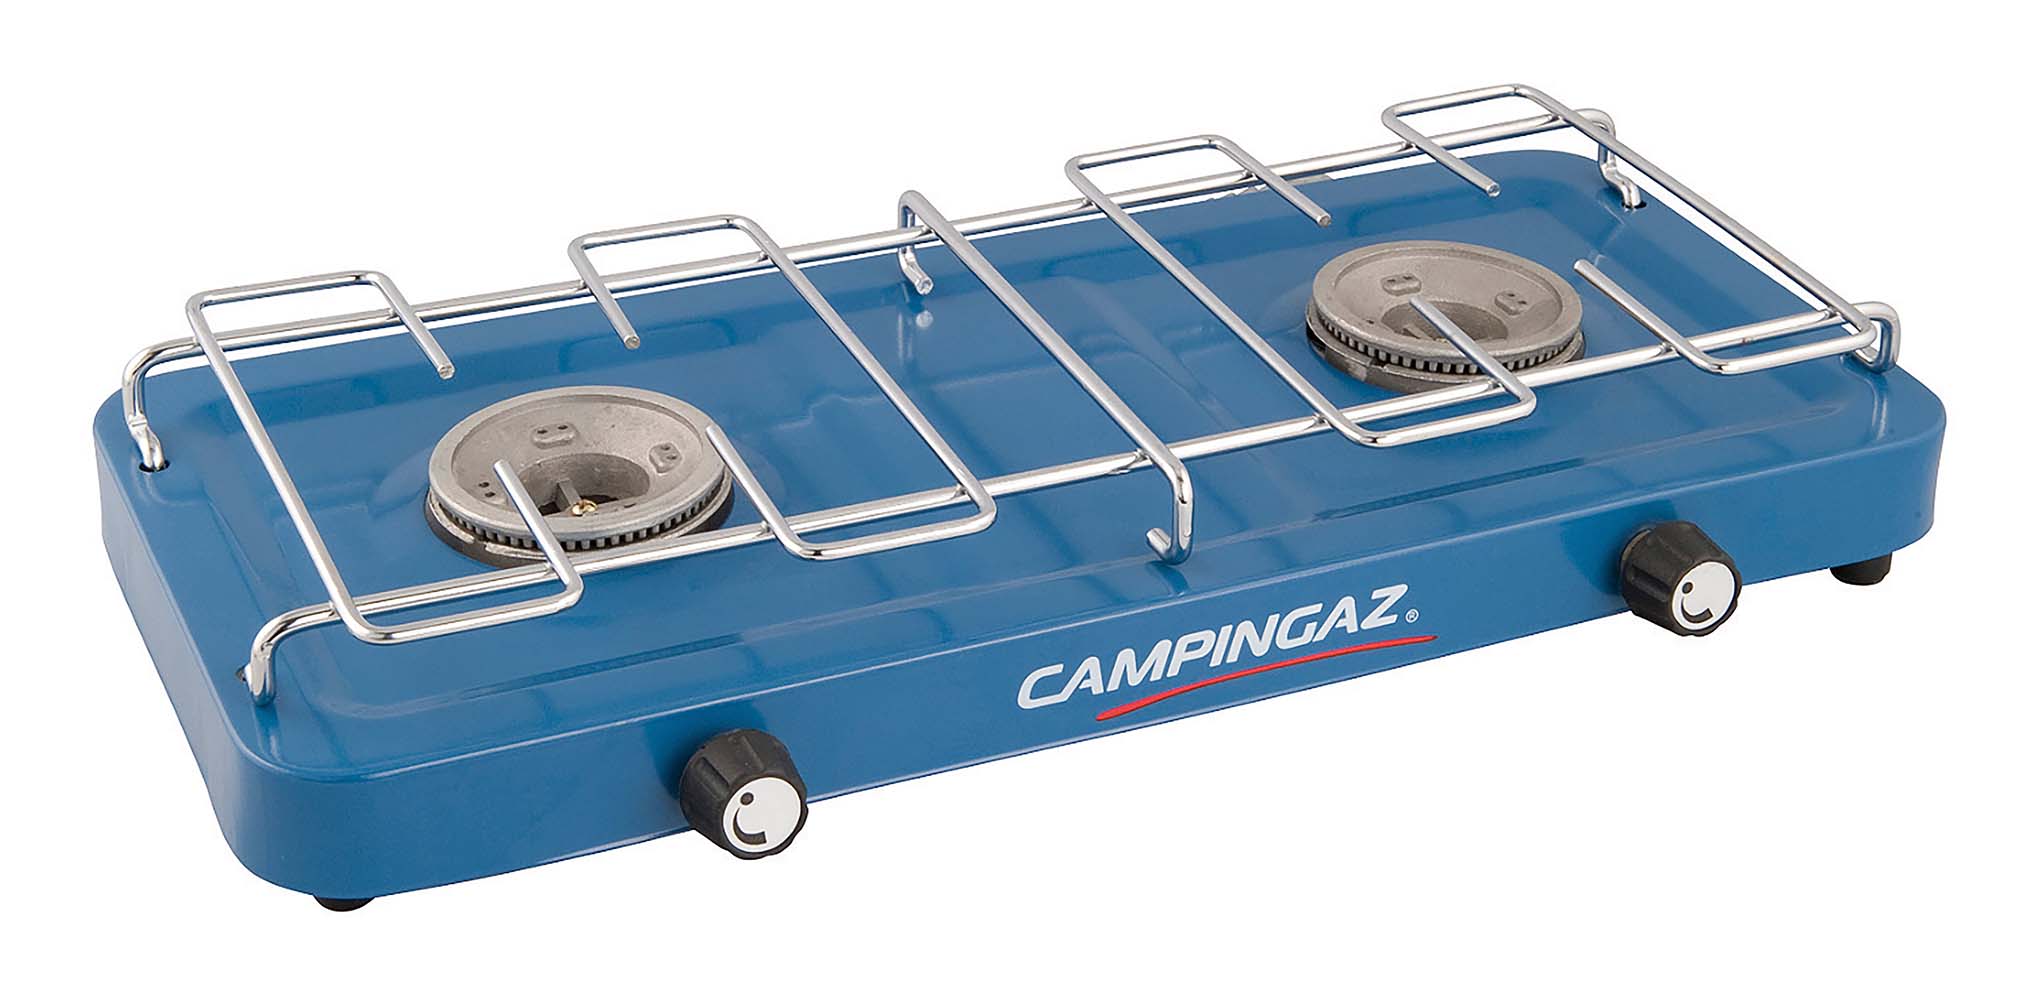 8809597 A compact and practical set. Features two adjustable burners of 1600 W each. Allowing for a cooking time of 7.30 minutes for 1 litre. This cooker takes up minimal space when transporting. Can be used in conjunction with the R907 Campingaz (burning time: 12 hours (+/- 30 minutes).